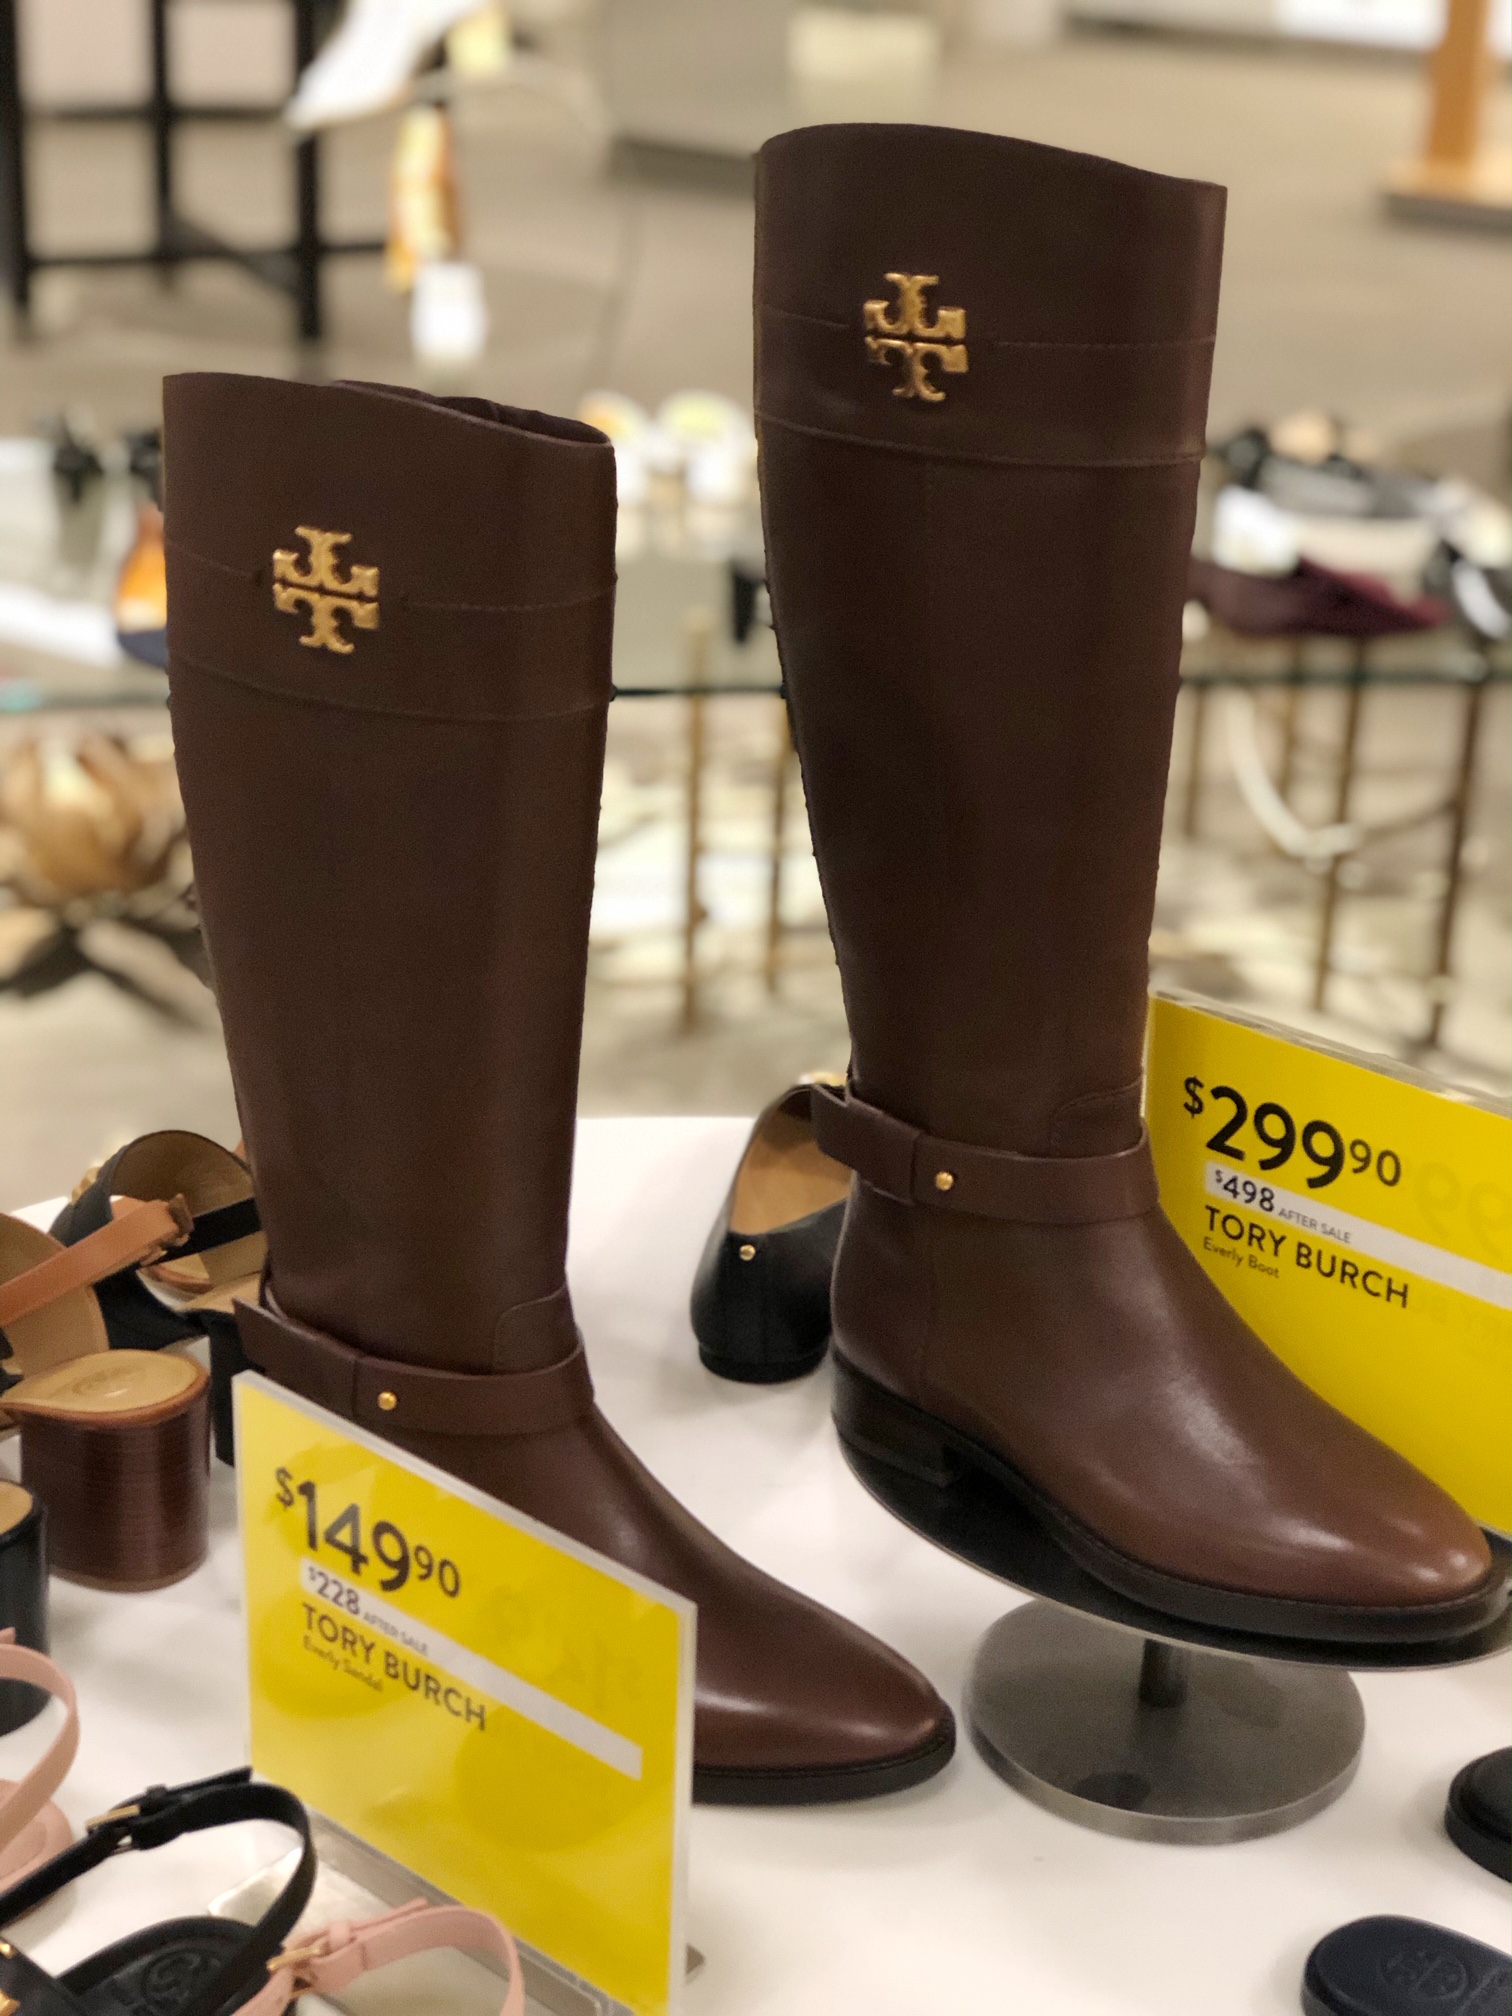 Tory Burch Riding Boots Nsale 2019 - The Double Take Girls